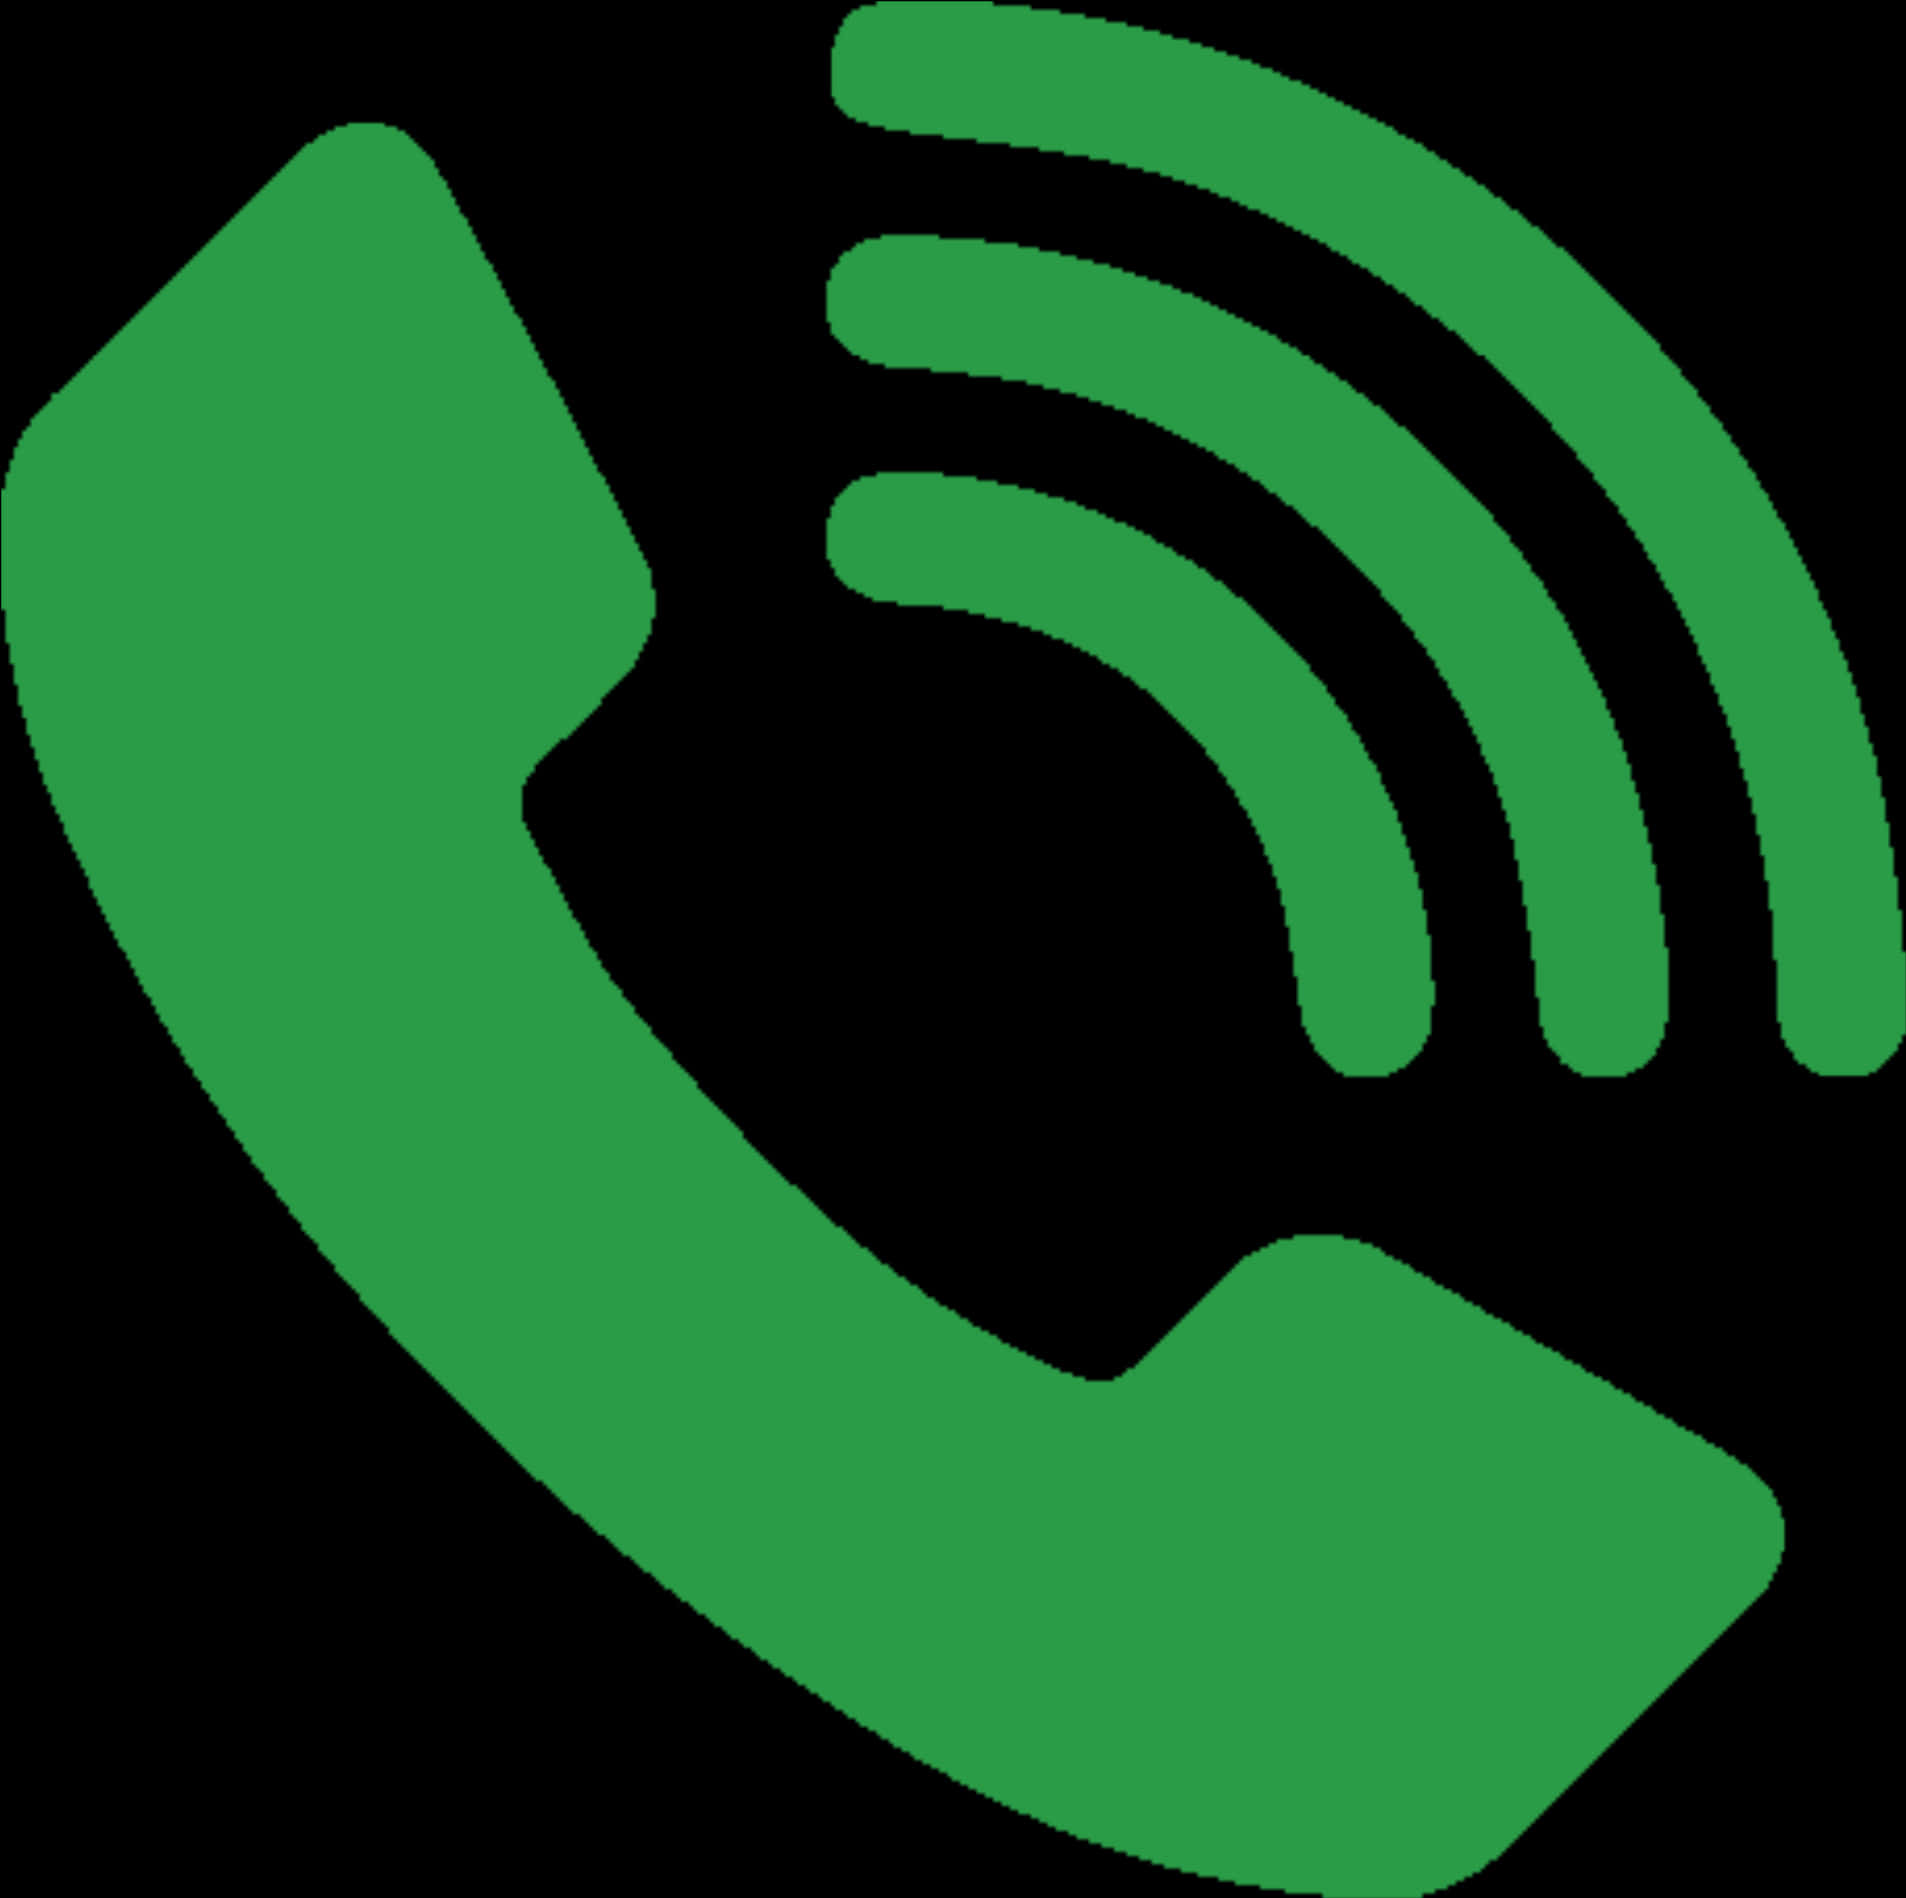 A Green Phone Receiver With Waves Coming Out Of It